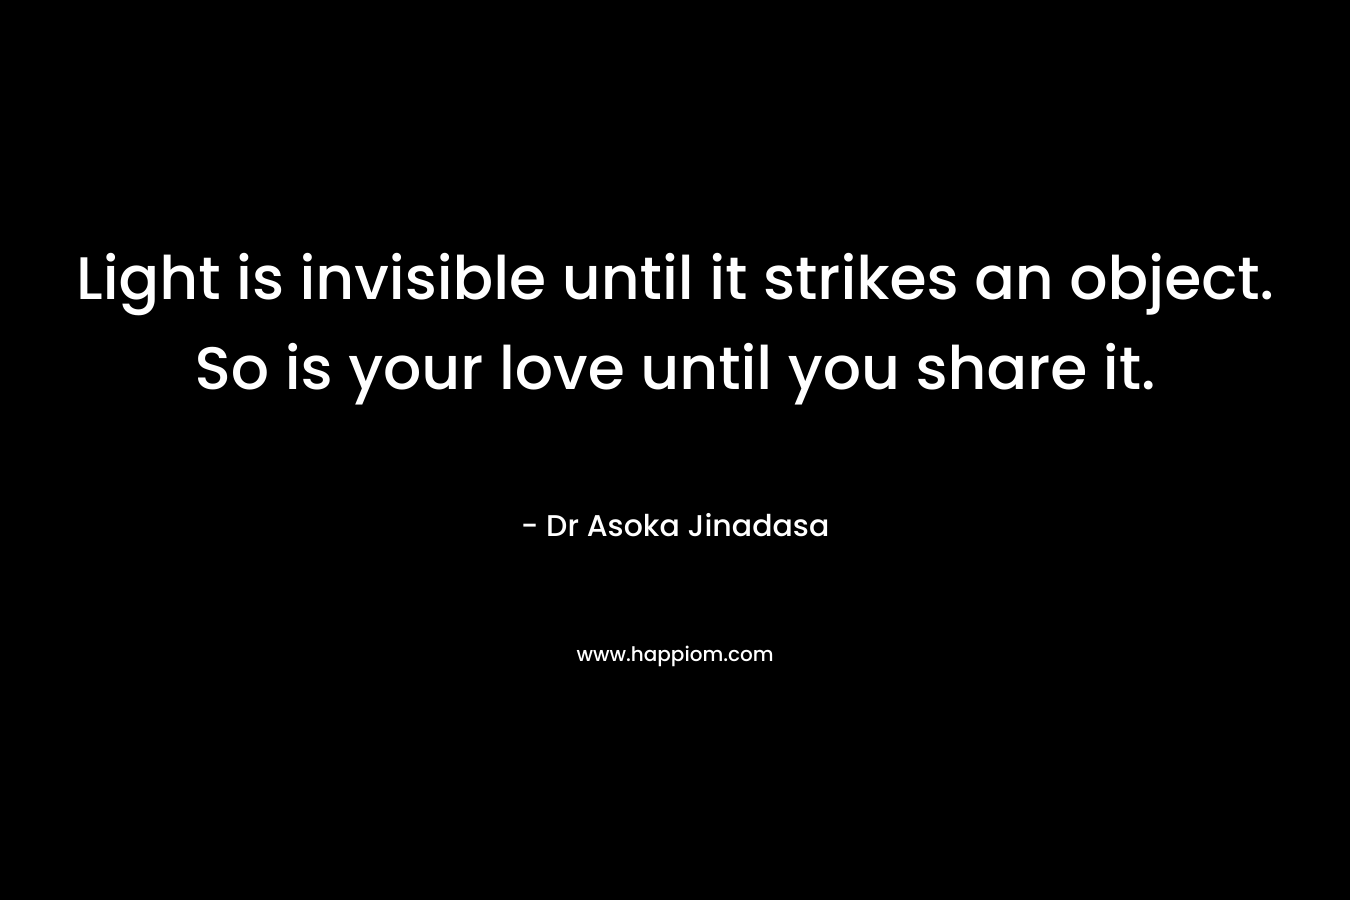 Light is invisible until it strikes an object. So is your love until you share it. – Dr Asoka Jinadasa